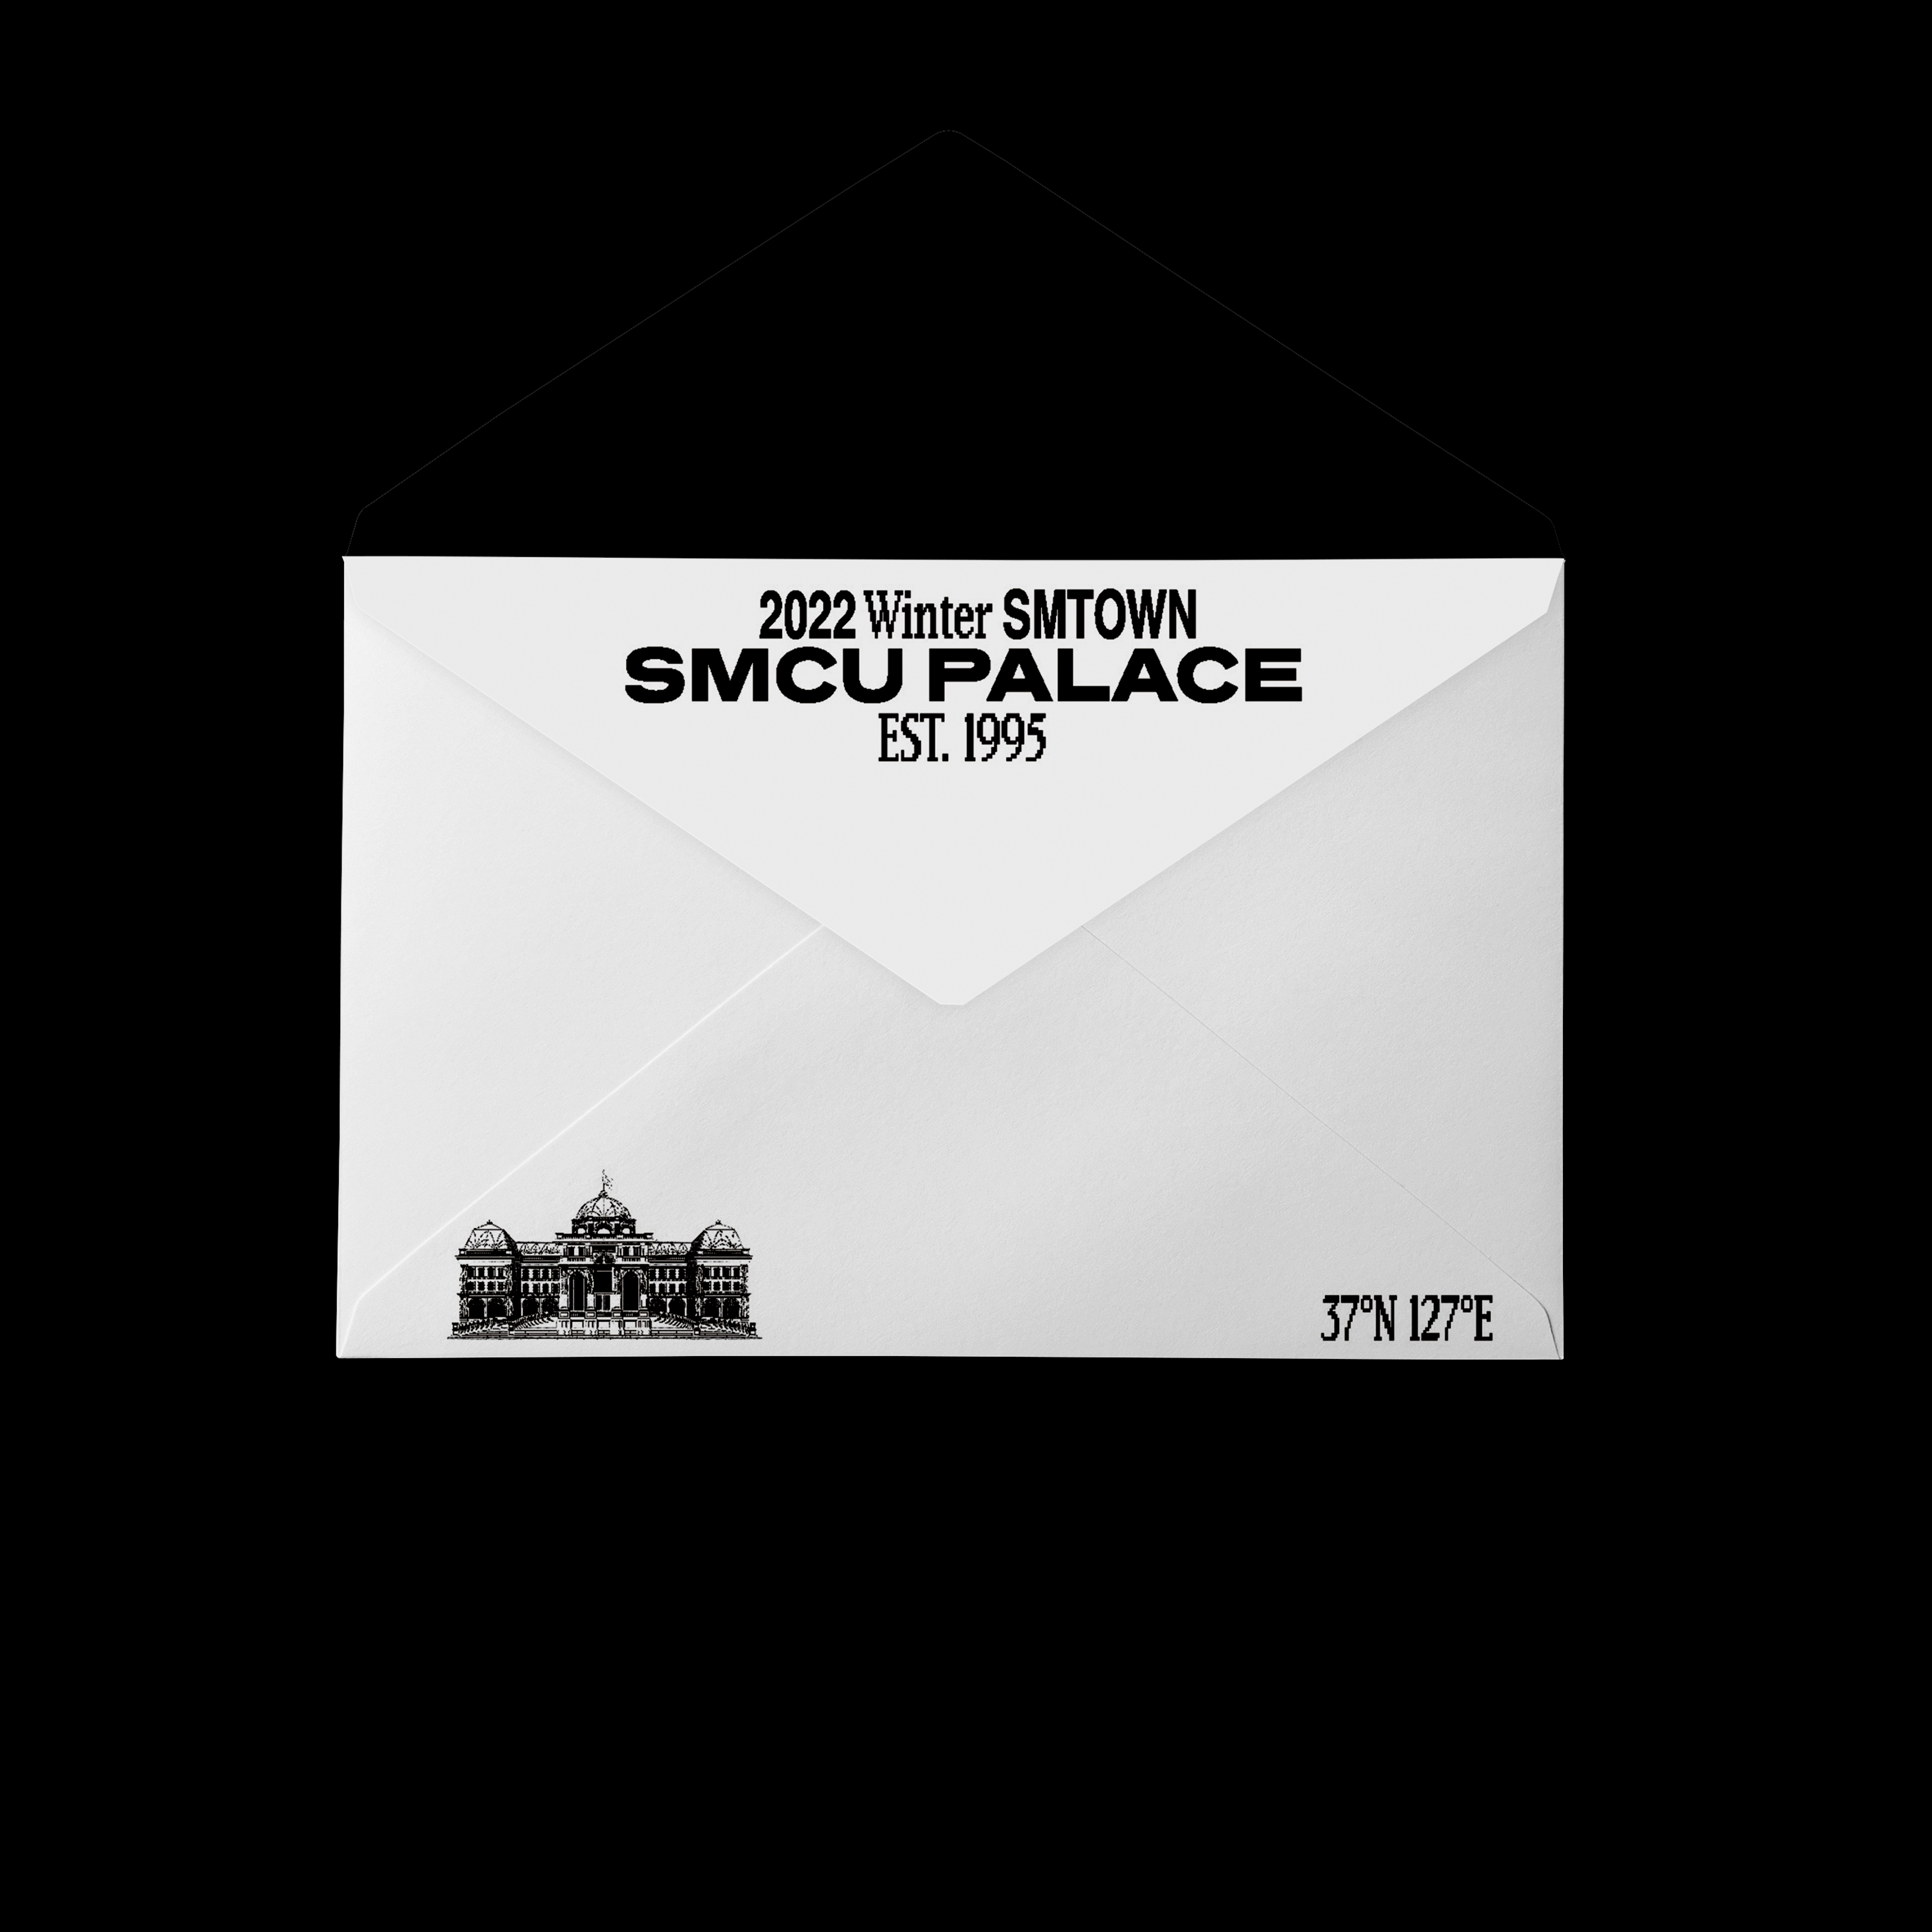 NCT 127 - 2022 Winter SMTOWN : SMCU PALACE (GUEST. NCT 127) (Membership Card Ver.) (Smart Album)